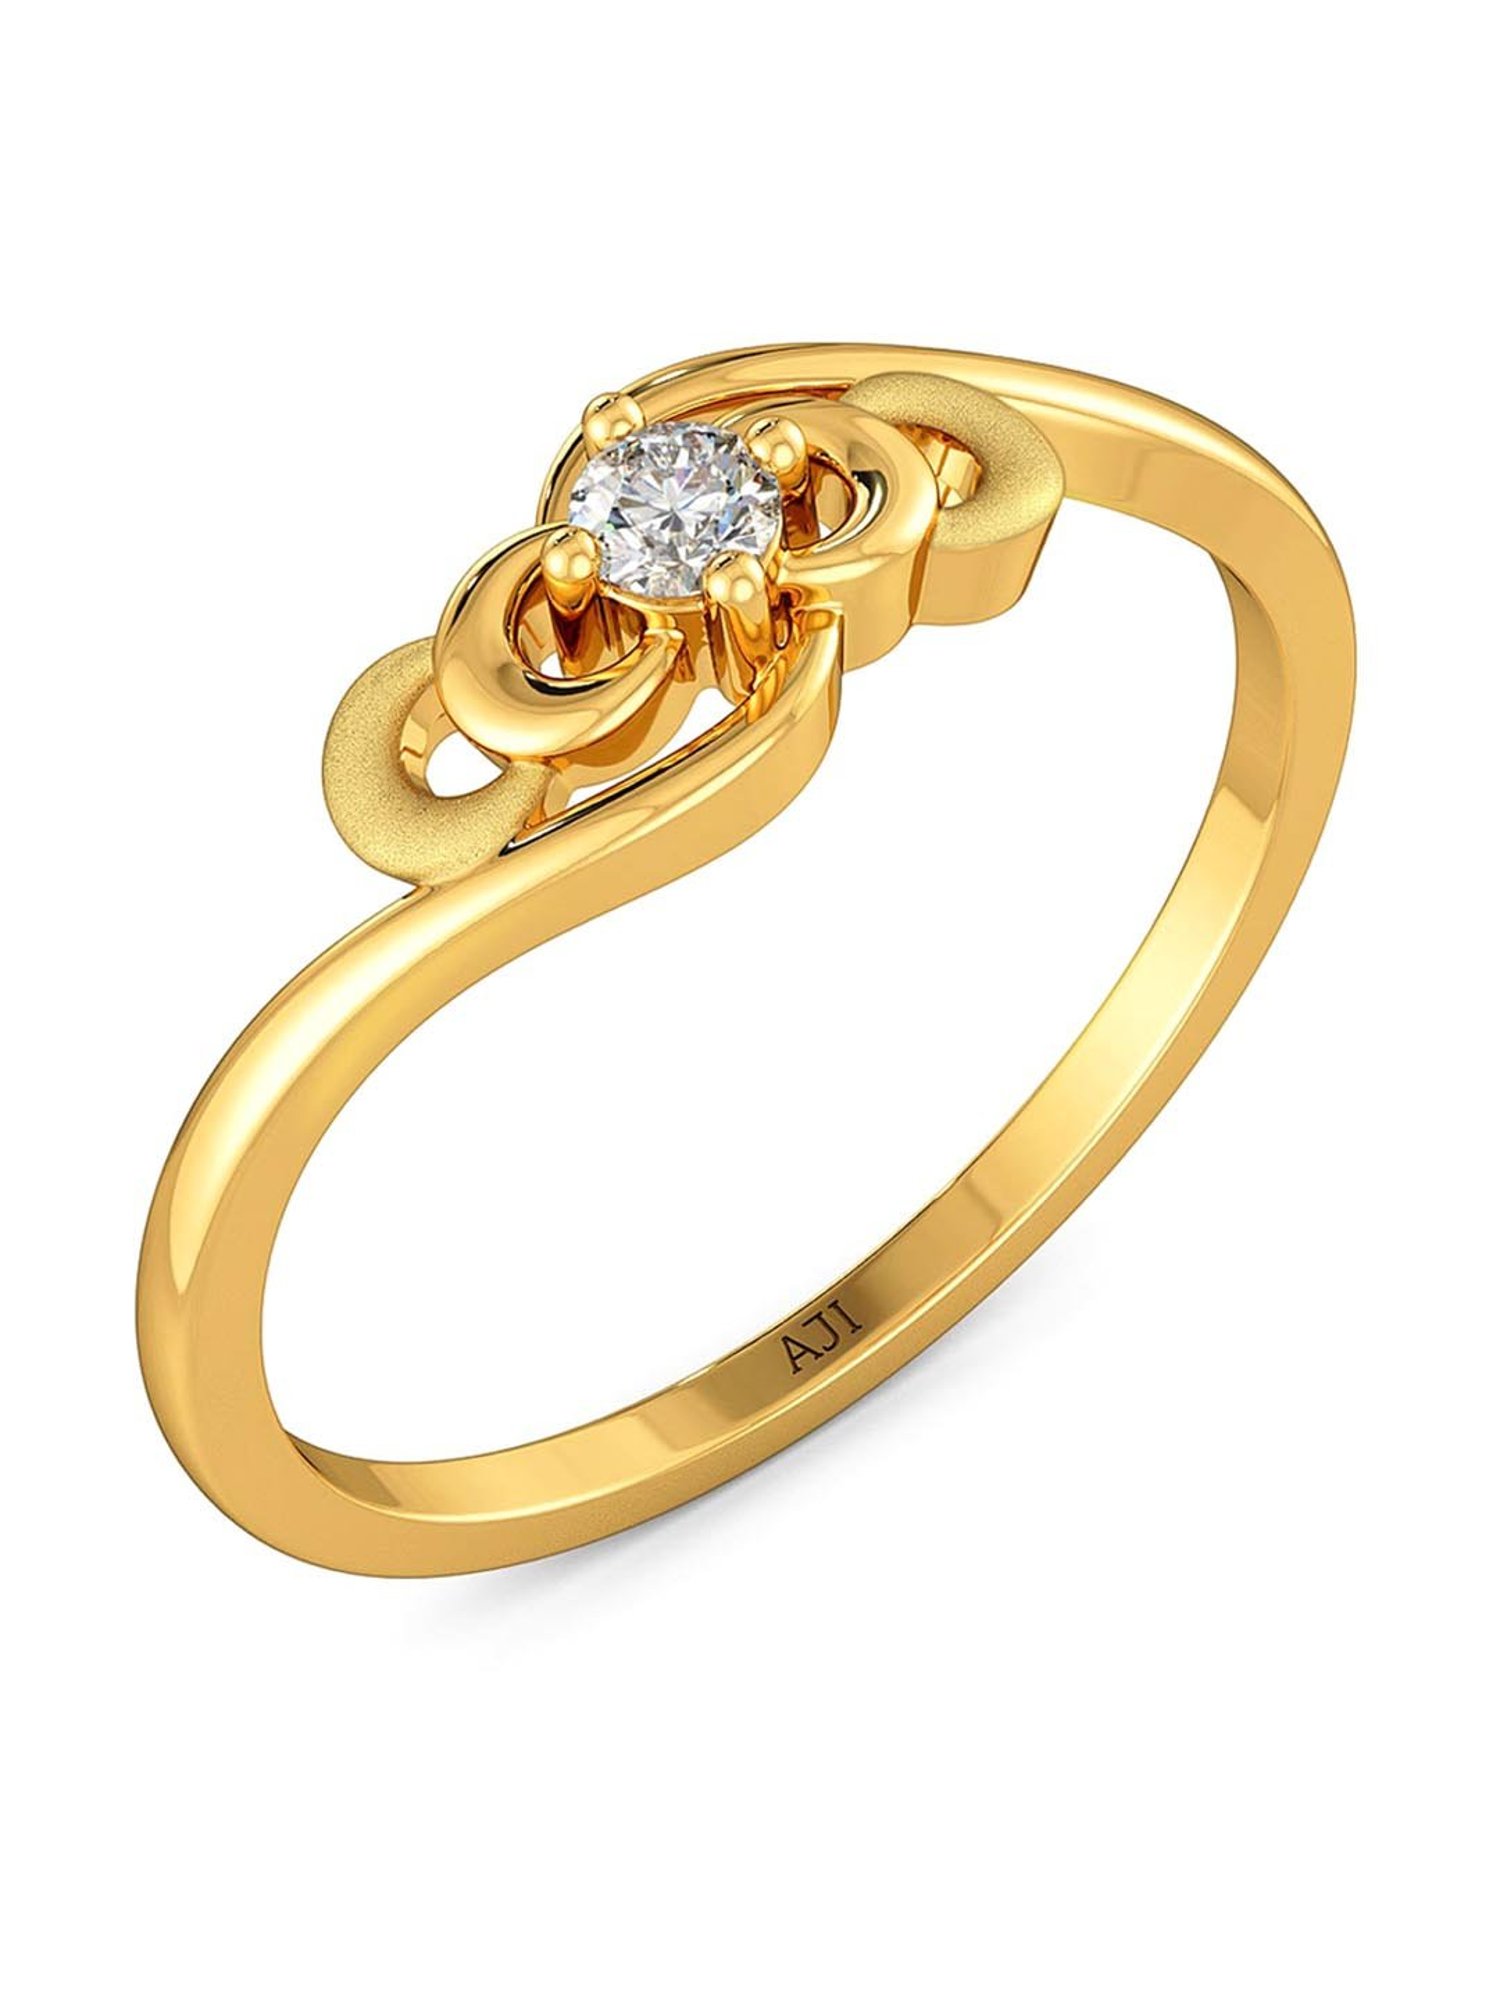 14 KT Yellow Gold Unique Relationships Diamond Ring